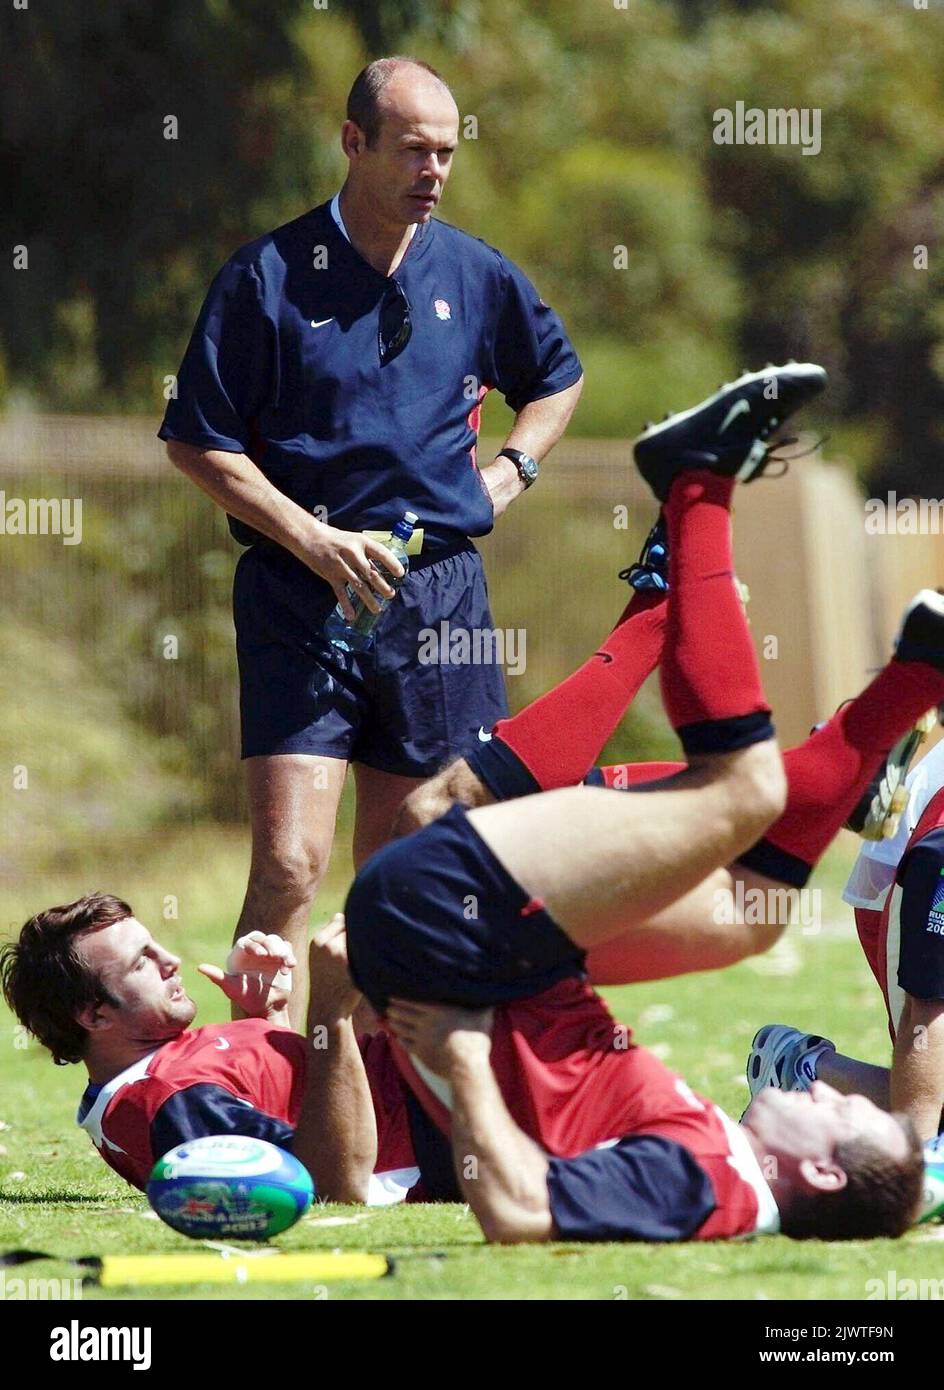 Clive Woodward, coach for the English Rugby Union team during their  training run held at Hale School near Perth. England are in Australia as  part of the Rugby World Cup Series which